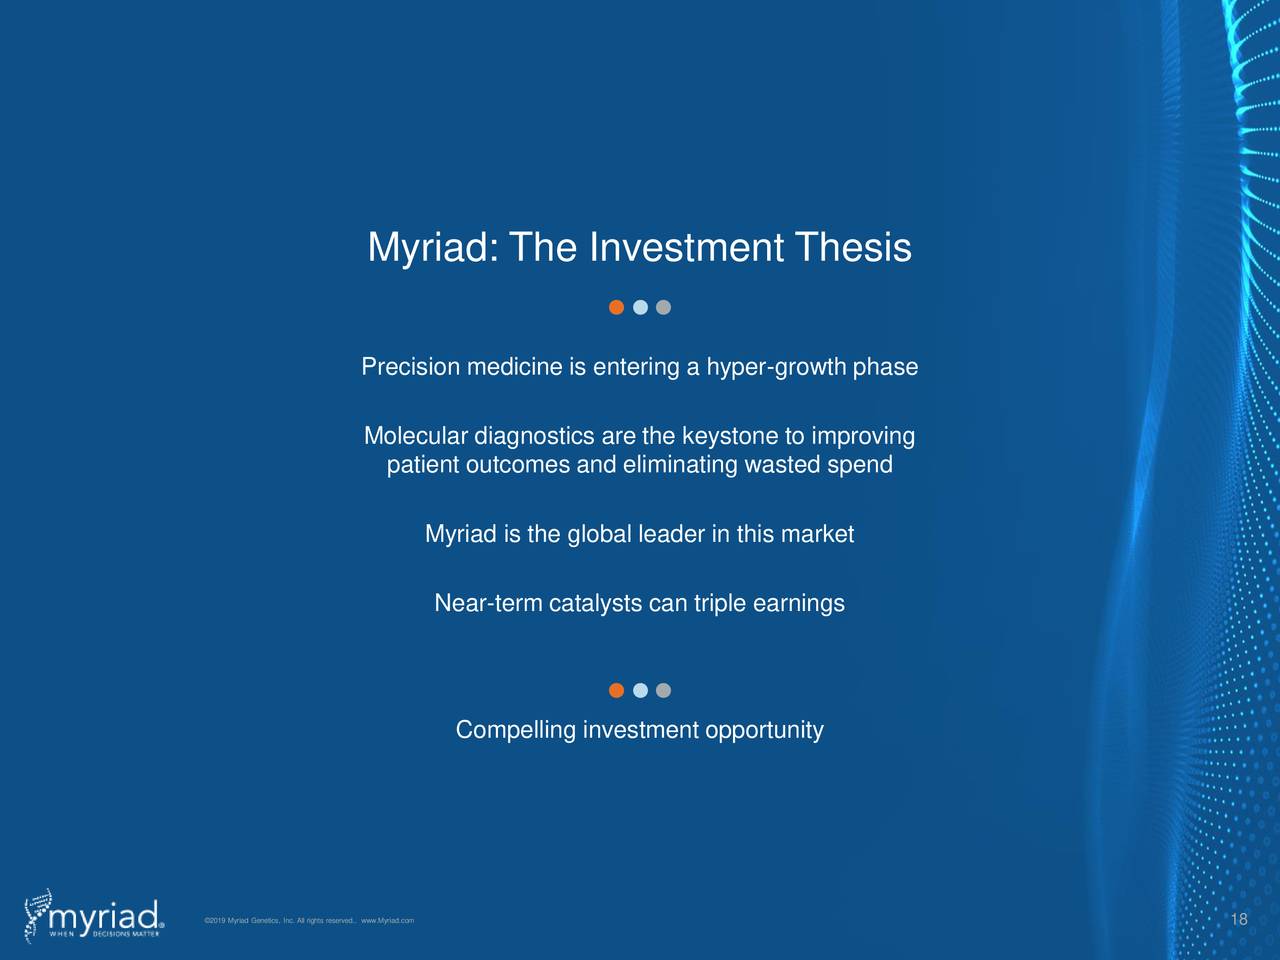 Myriad: The Investment Thesis